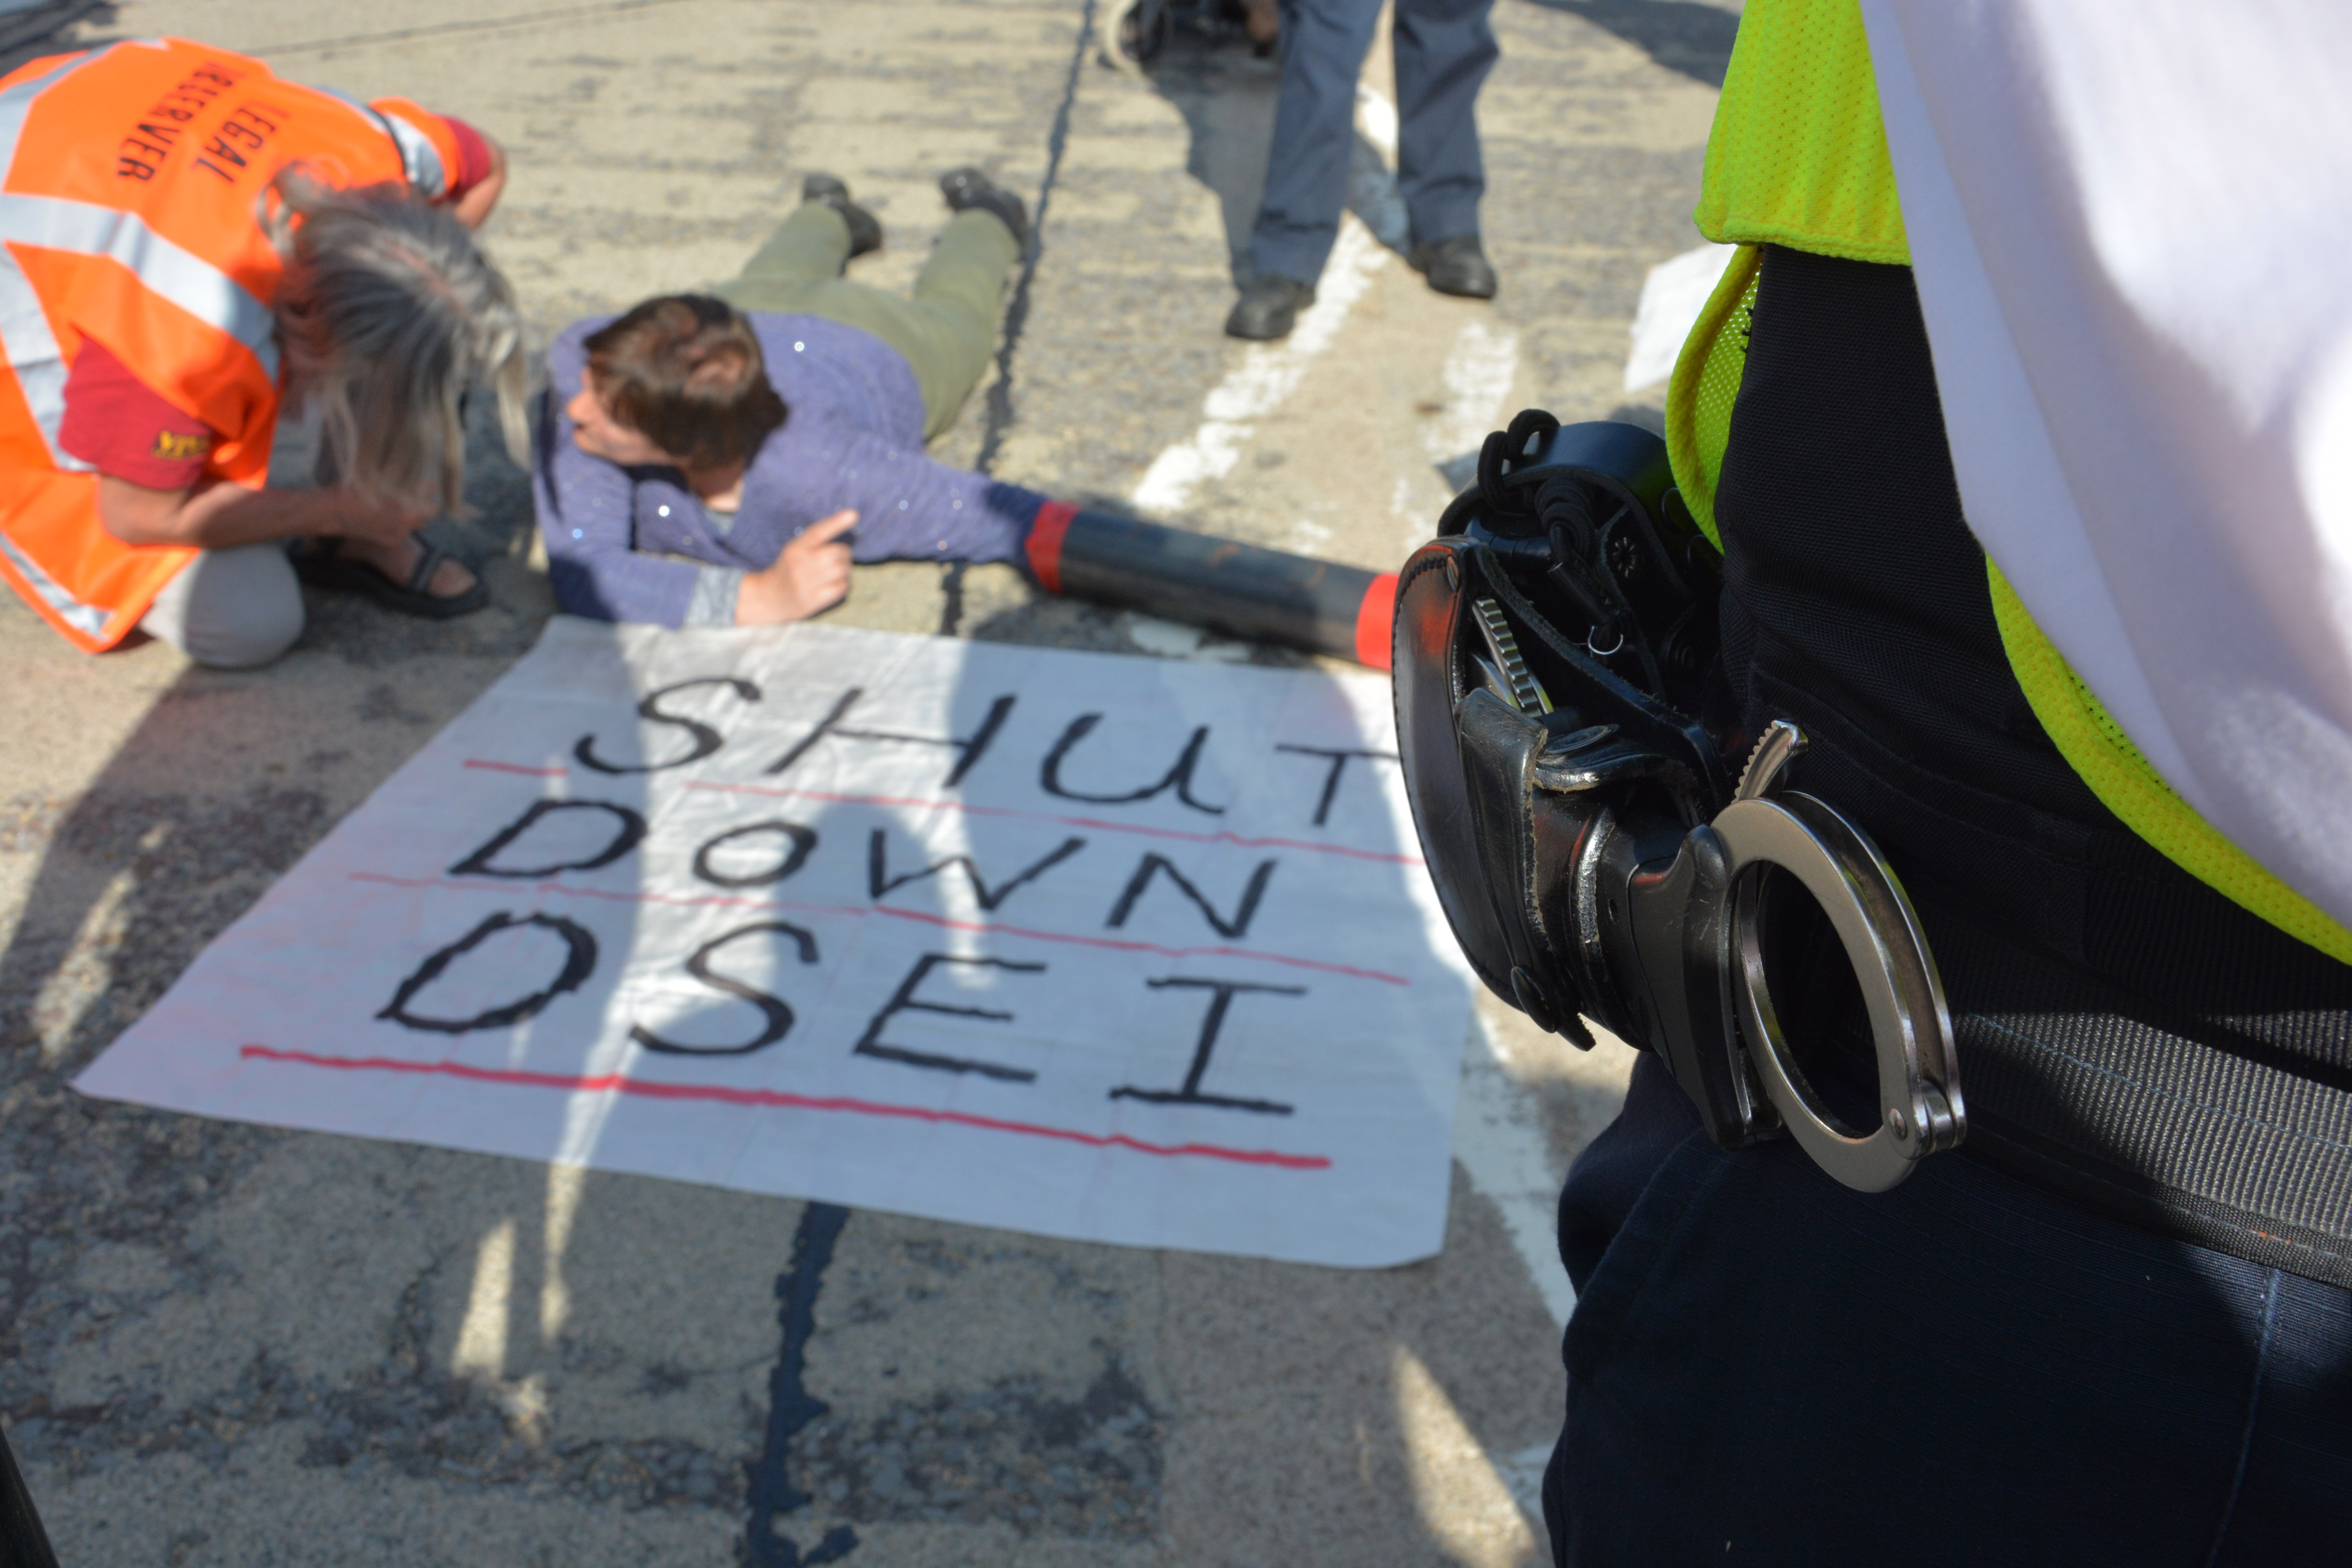 Activists 'lock-on' to block road outside DSEI